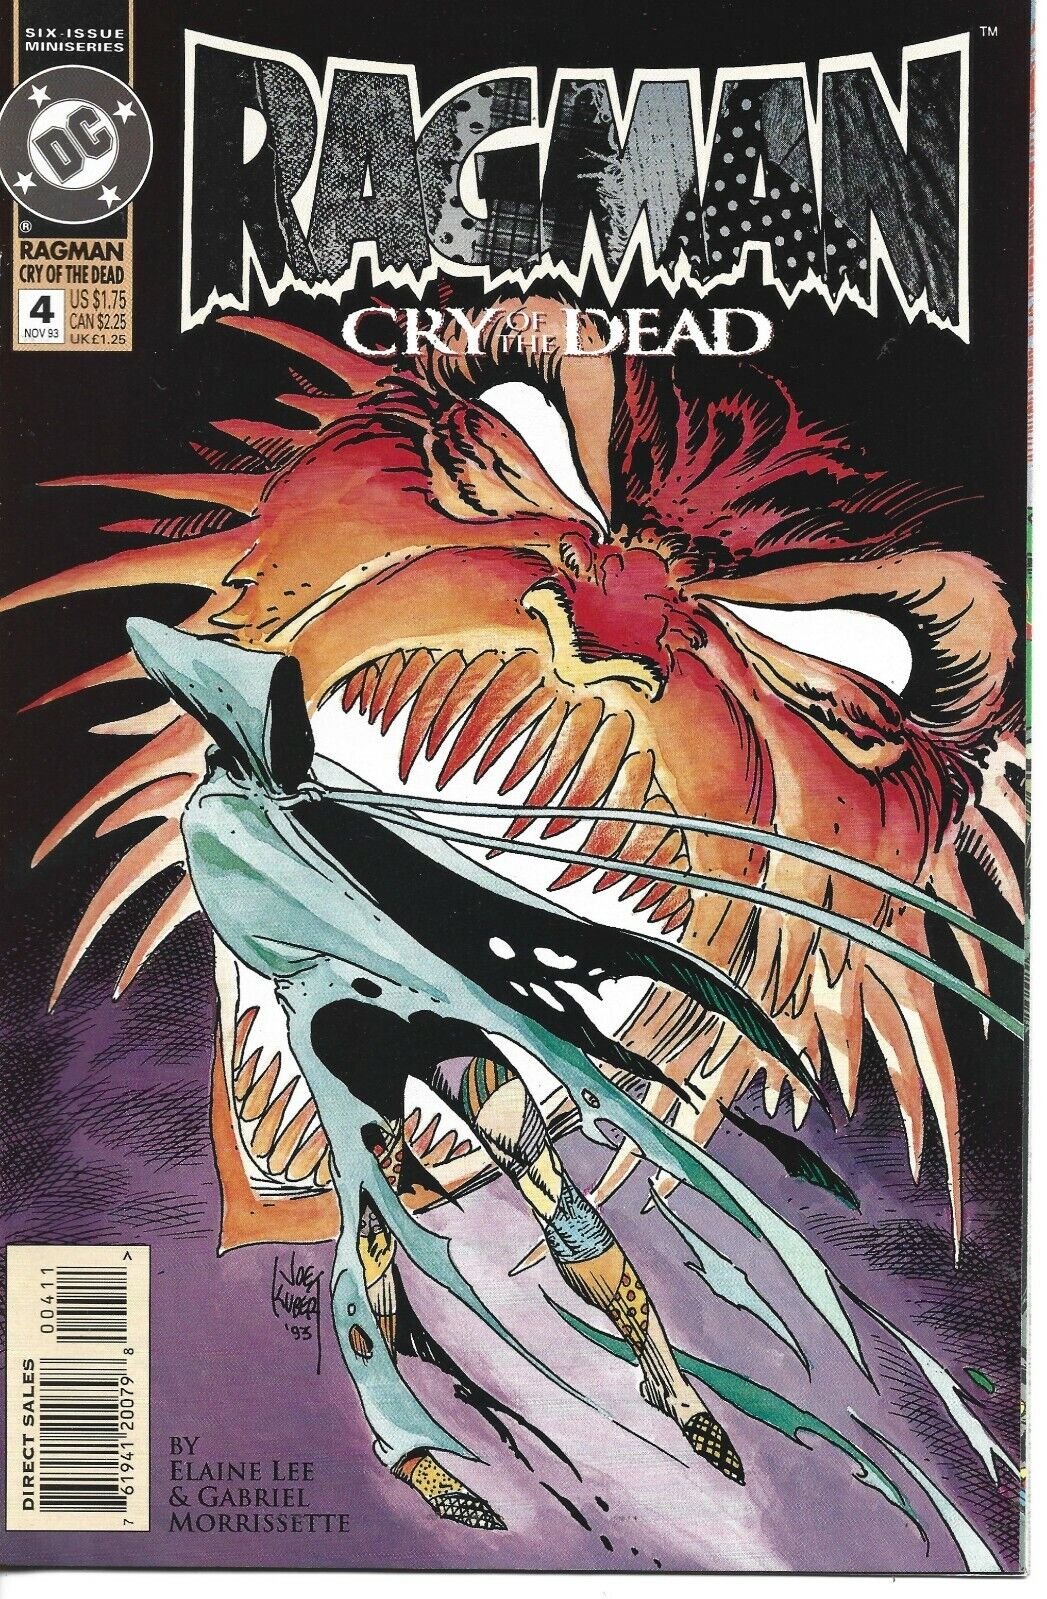 RAGMAN CRY OF THE DEAD #4 DC COMICS 1993 BAGGED AND BOARDED 